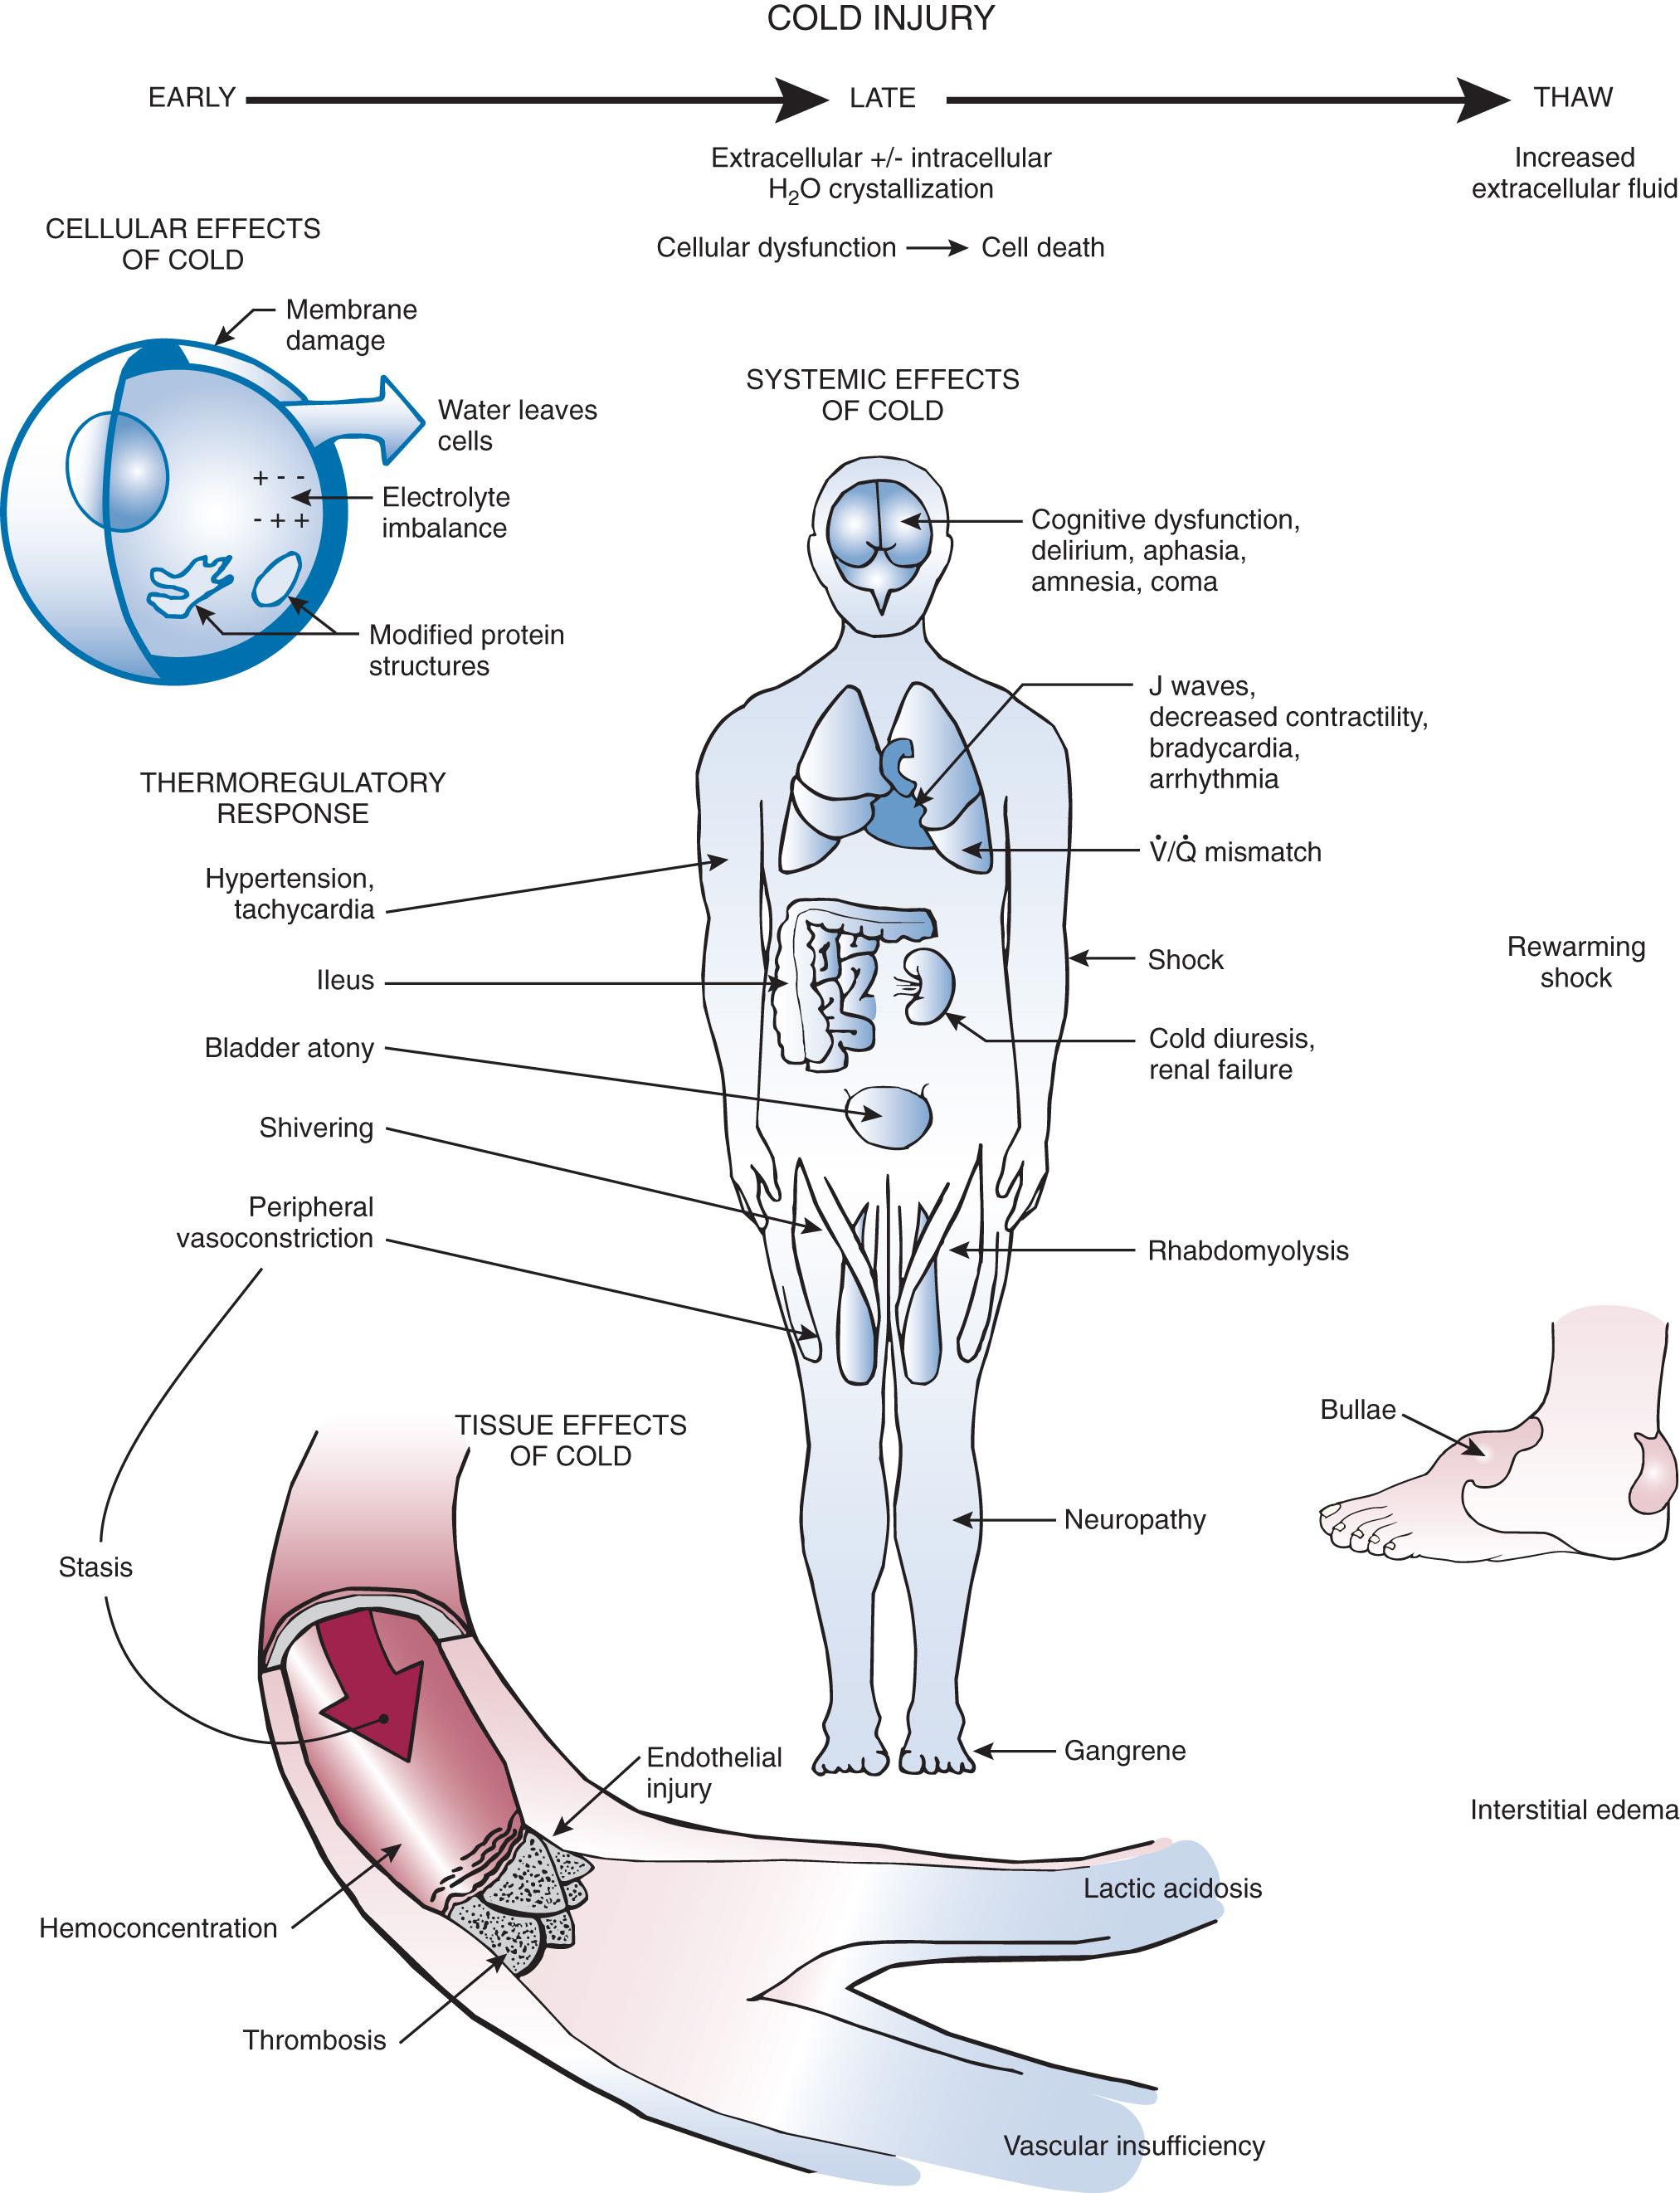 Figure 65.2, Cold-induced injuries such as hypothermia and frostbite lead to a thermoregulatory response (e.g., shivering and increased sympathetic activity), cellular and tissue effects (e.g., membrane damage, electrolyte imbalance, endothelial injury, and thrombosis), and systemic effects (e.g., shock, arrhythmia, and neuromuscular dysfunction).